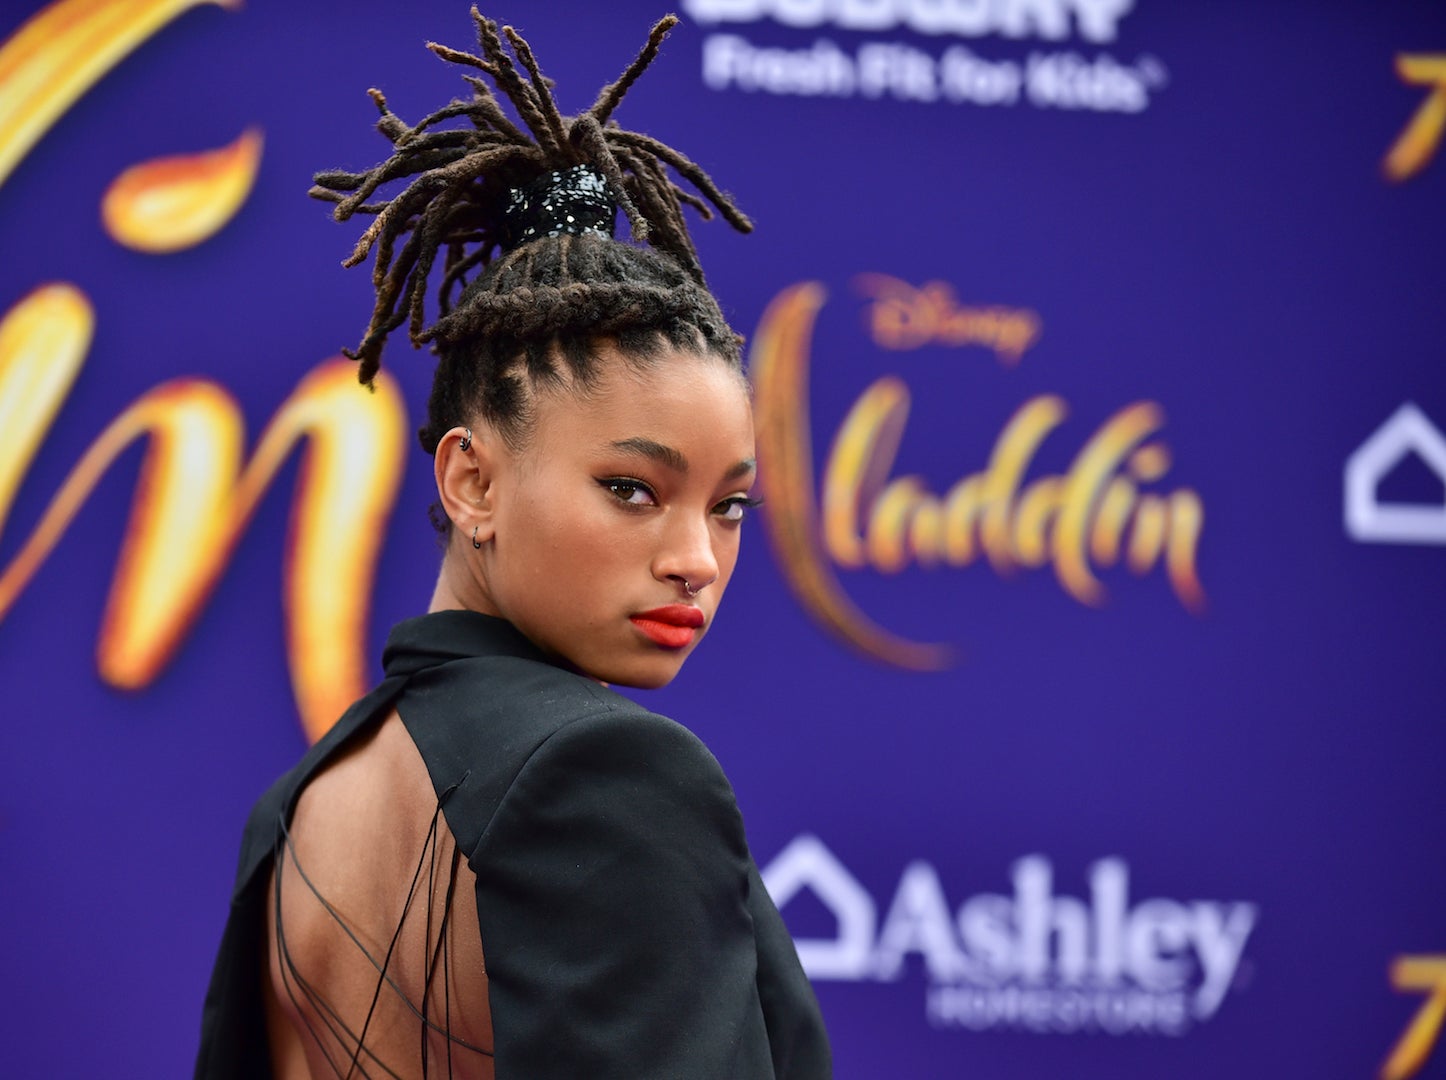 Black Celebrities Who Have Opened Up About Their Sexuality In 2019 (So Far)